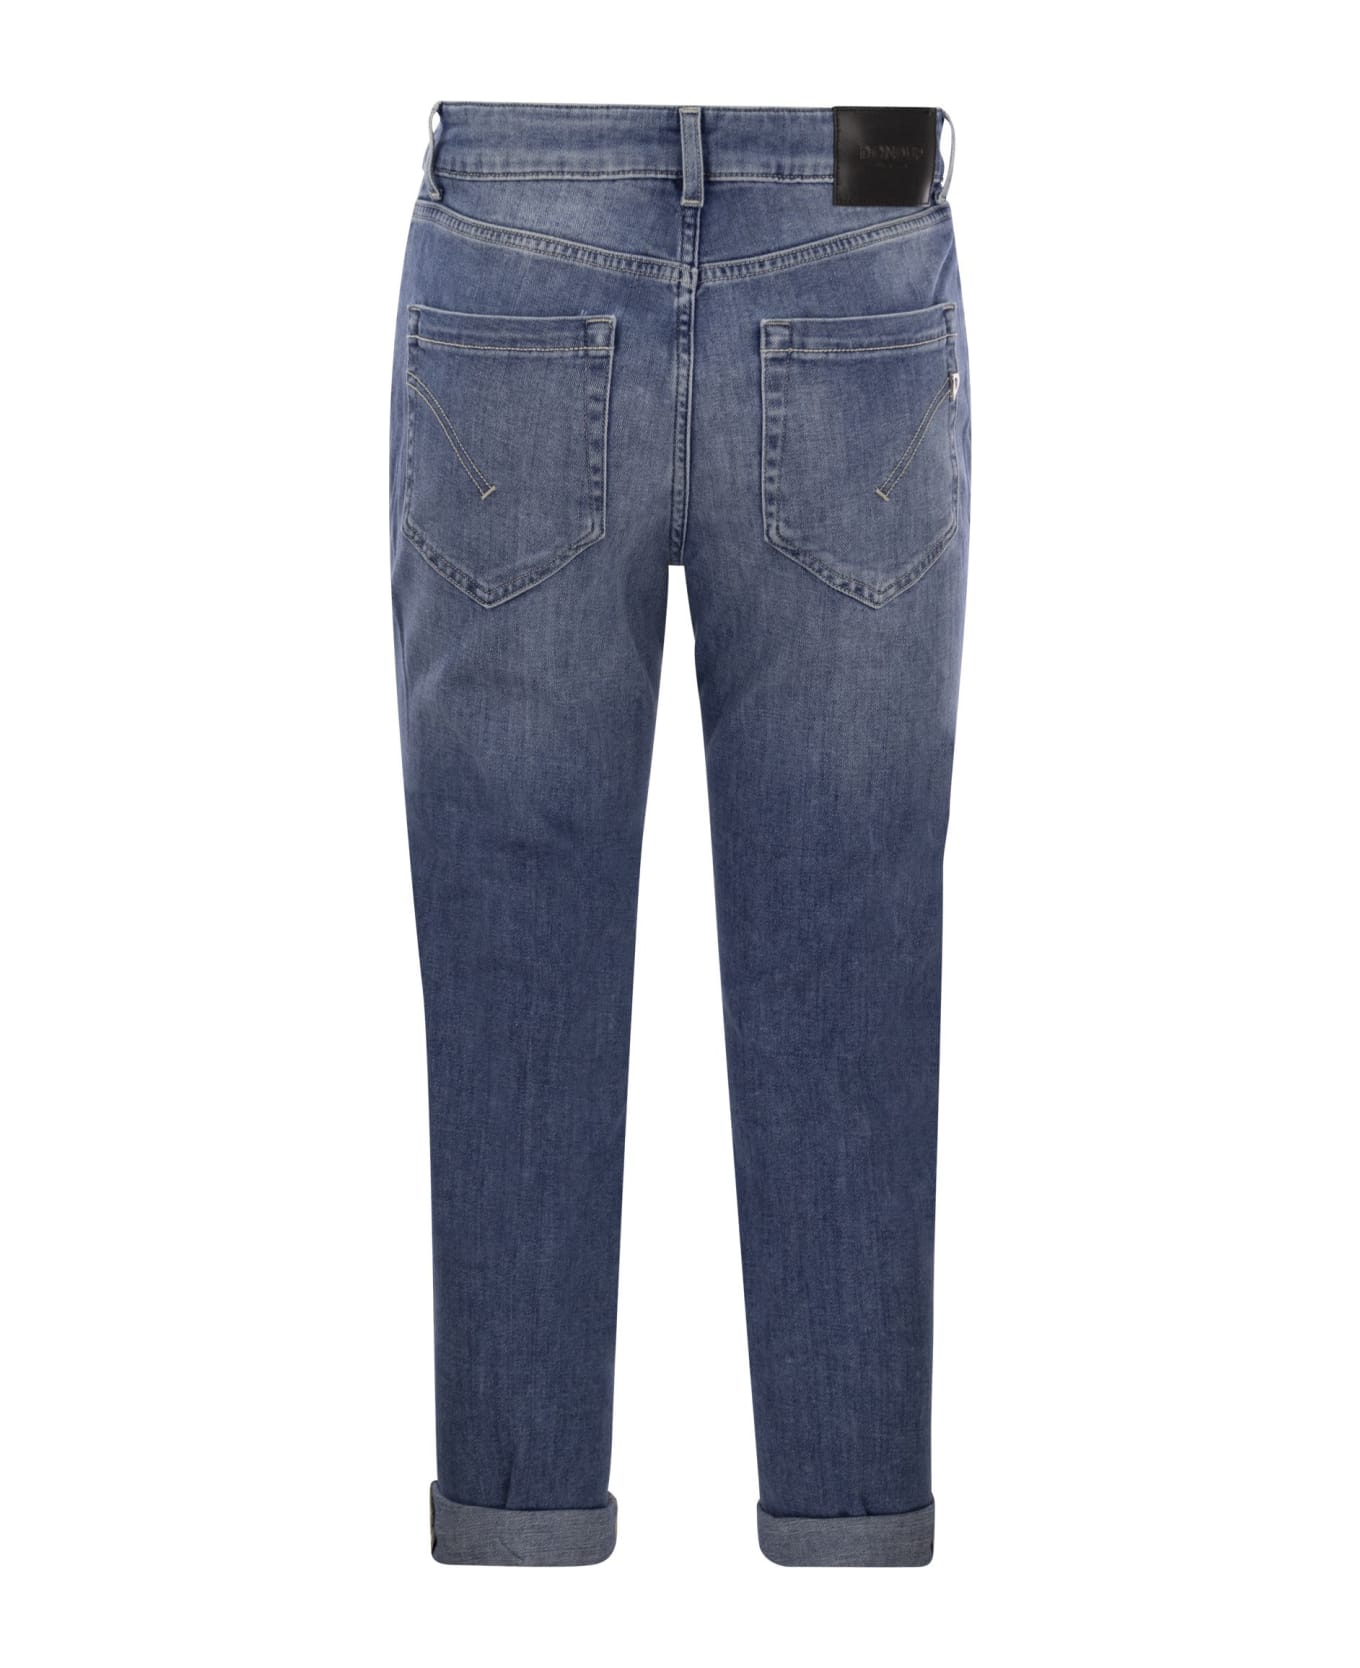 Dondup Koons - Loose Jeans With Jewelled Buttons - Medium Denim ボトムス